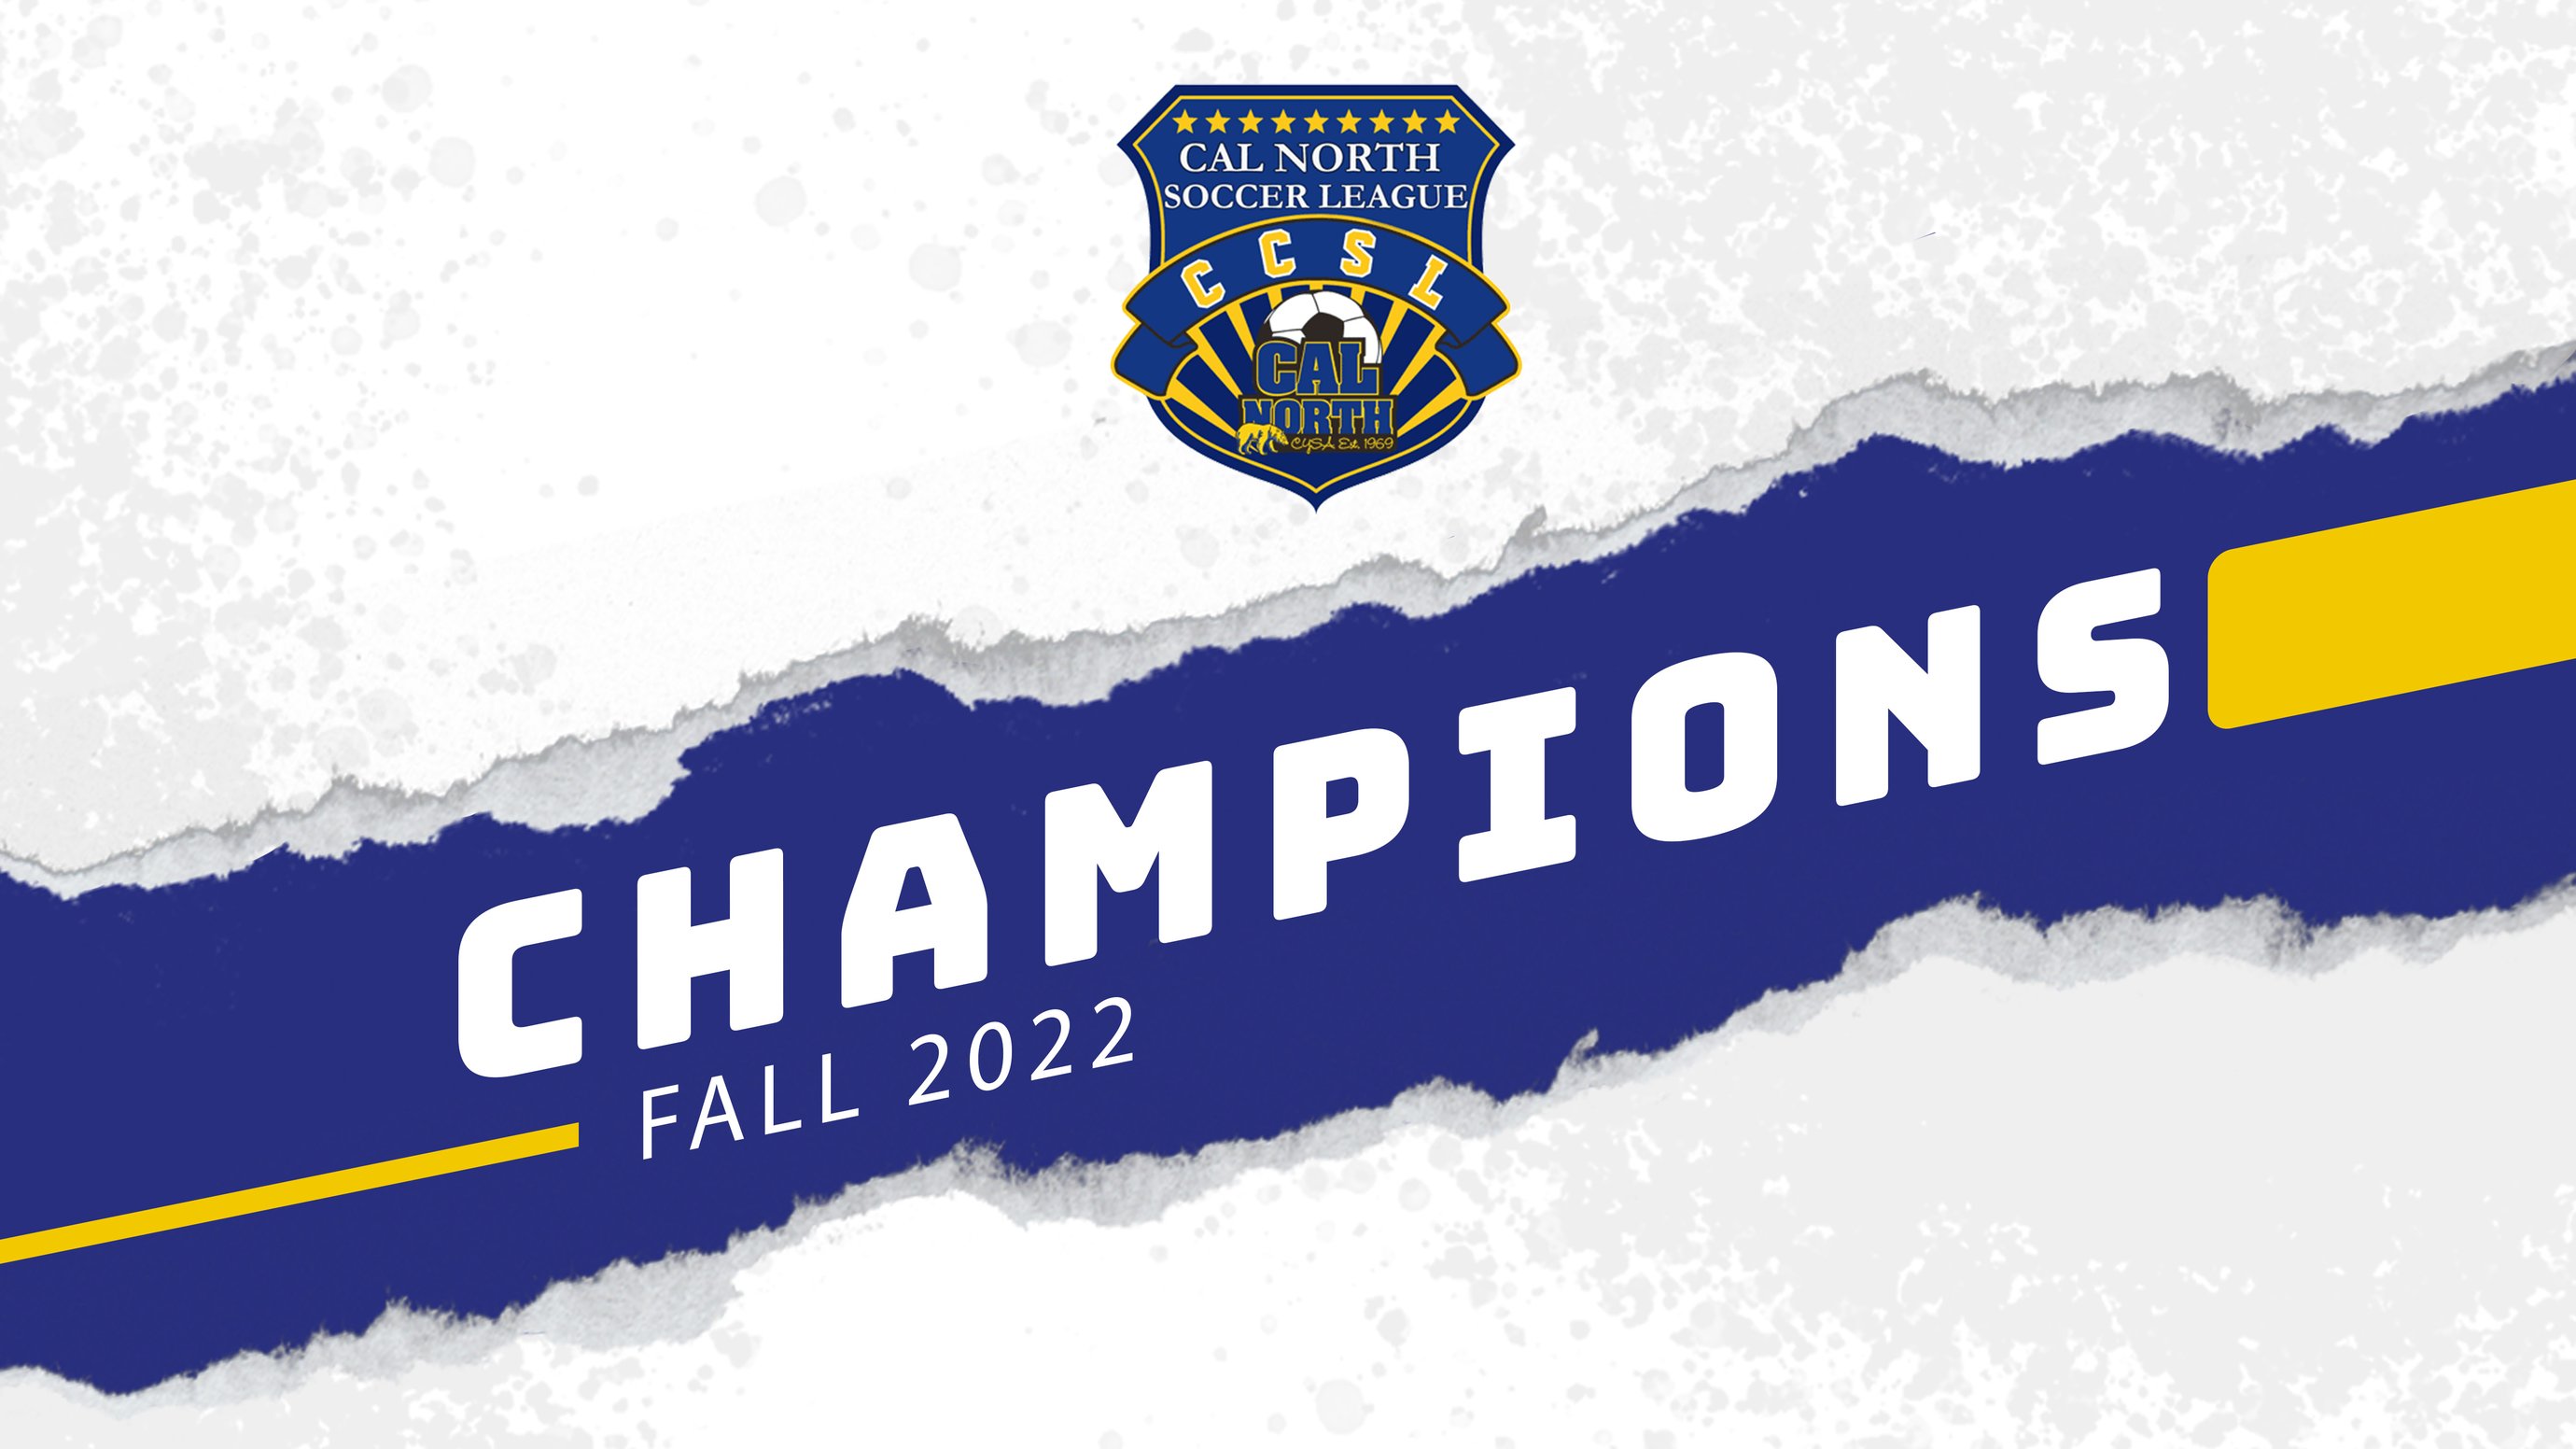 31 Teams Are Crowned Champions for Fall 2022 CCSL League